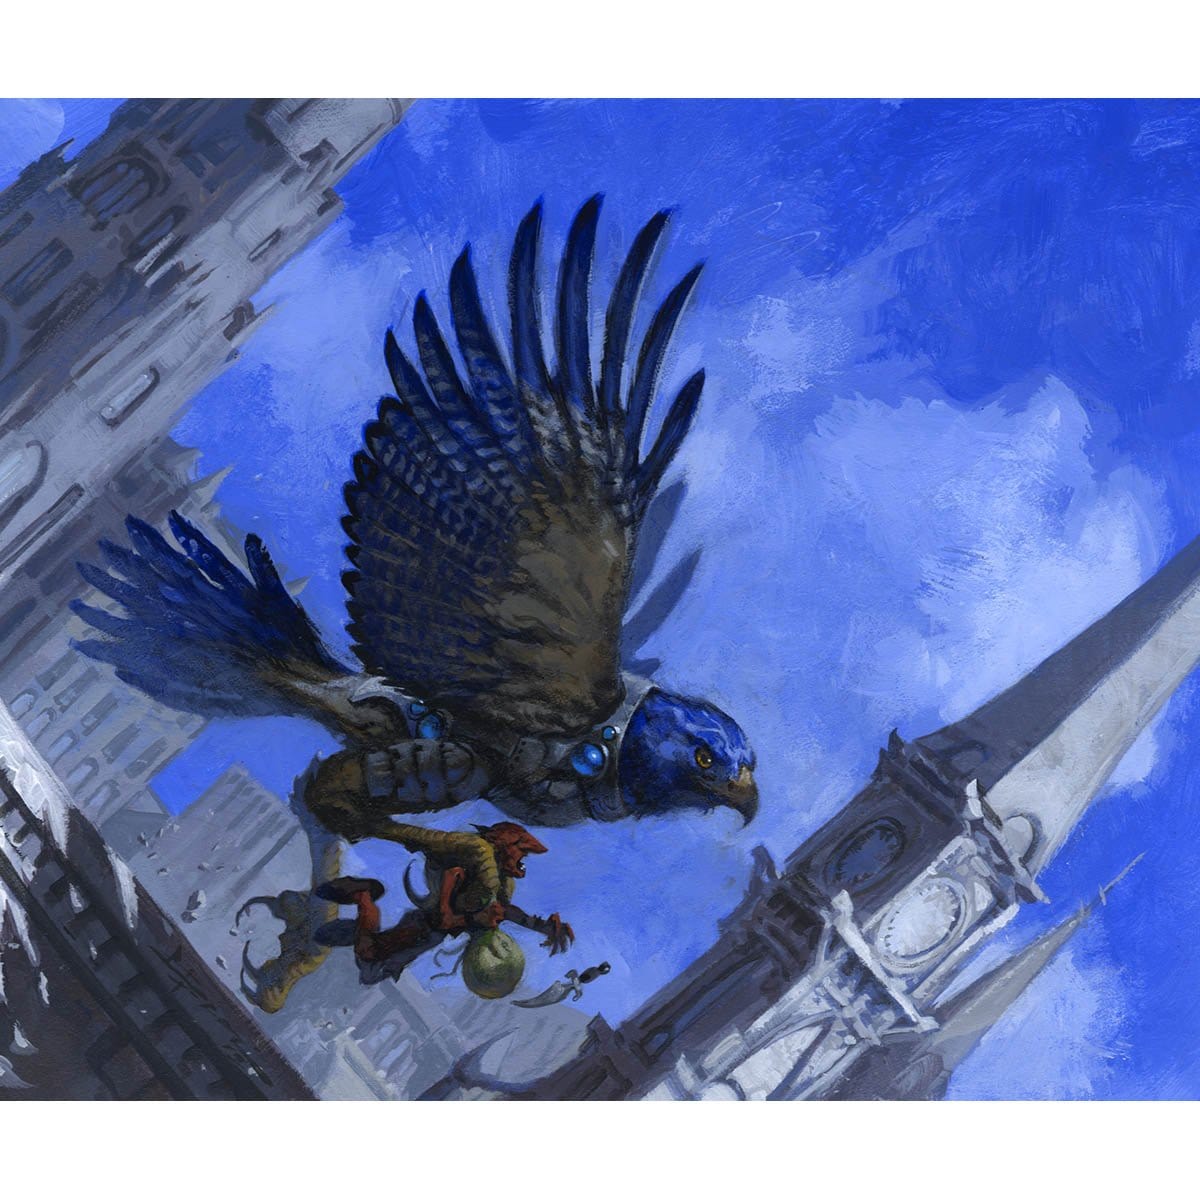 Skymark Roc Print - Print - Original Magic Art - Accessories for Magic the Gathering and other card games